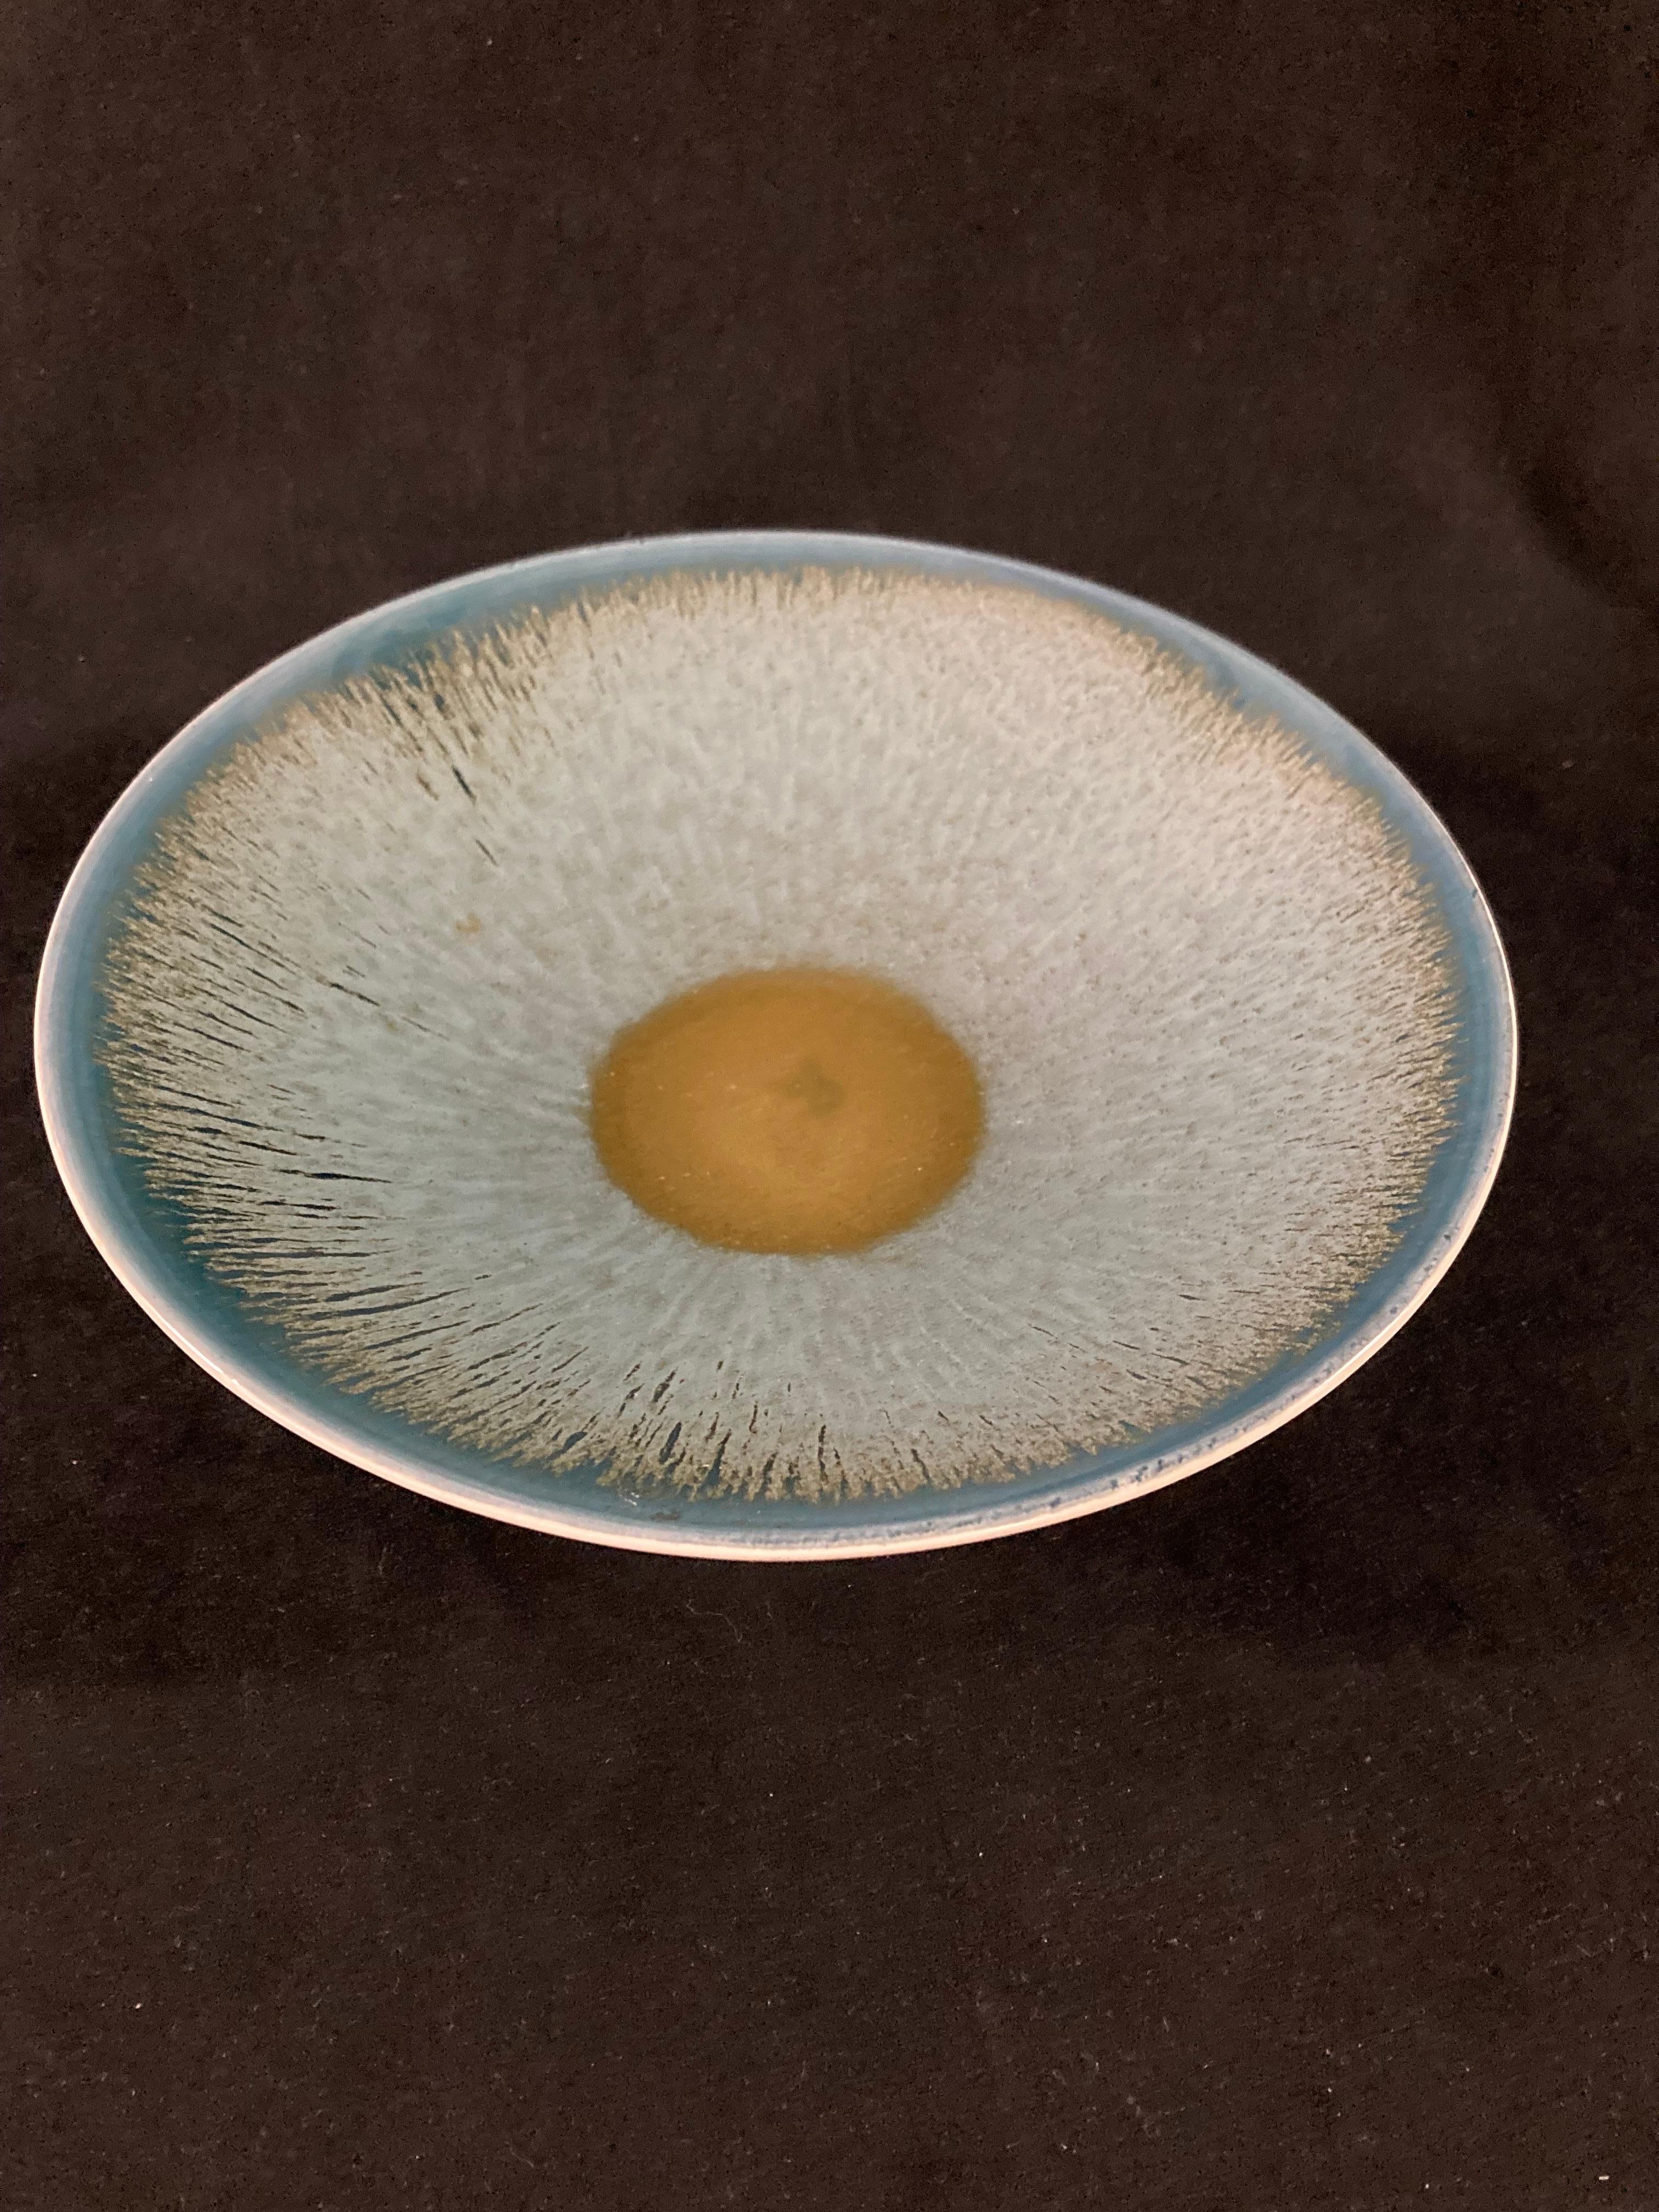 A 1960s Poole Pottery bowl or dish with abstract copper verdigris design.

Bears maker's mark under. This particular 'POOLE STUDIO england' mark was used from 1964 to 1966, allowing to date the bowl accurately.

It is a lovely decorative object in